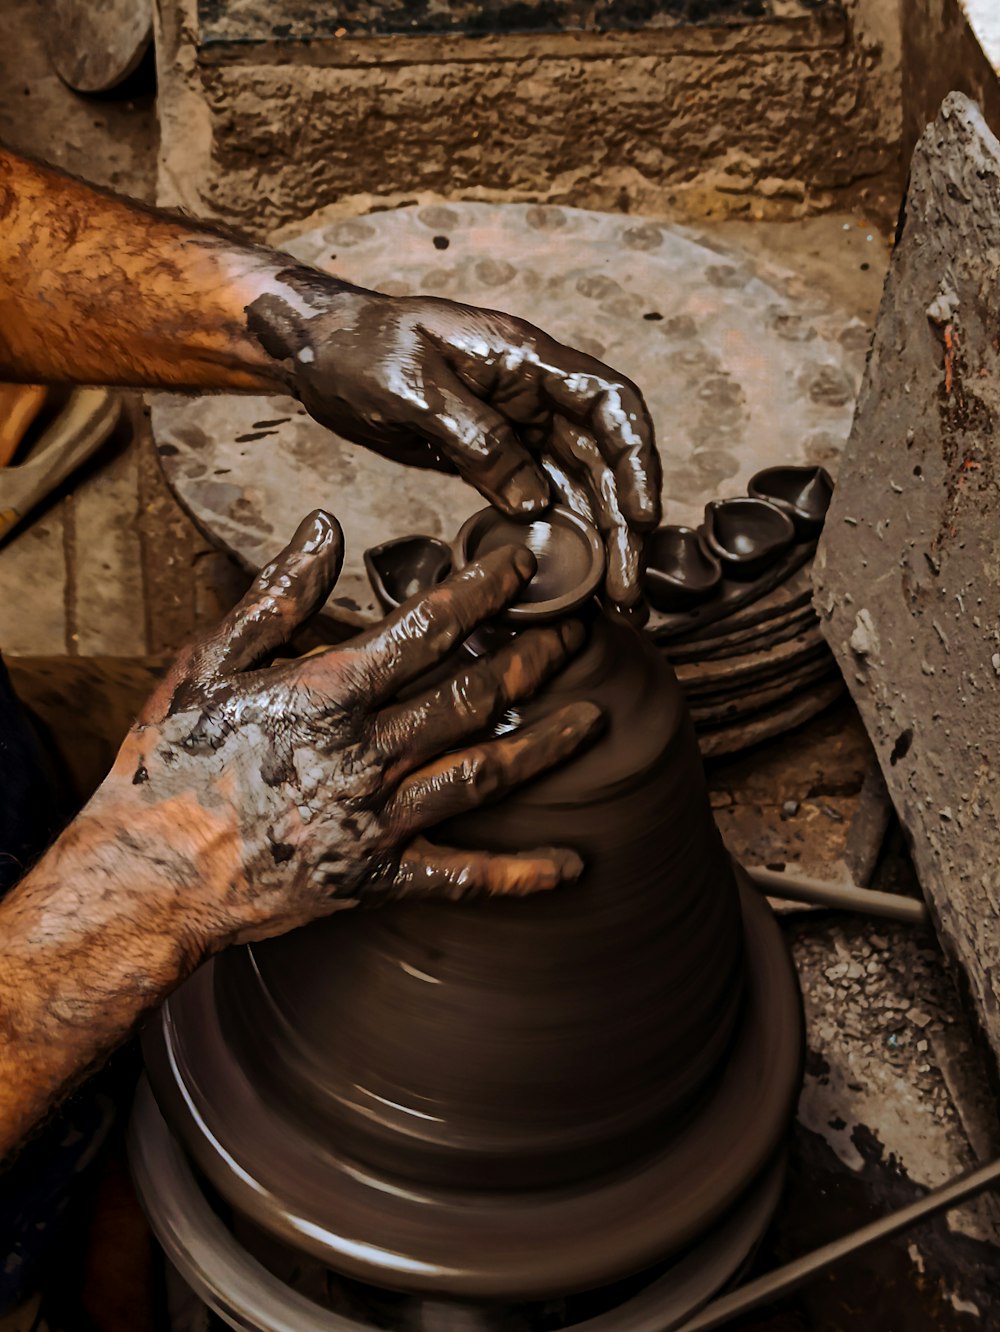 a person making a pot on a potter's wheel